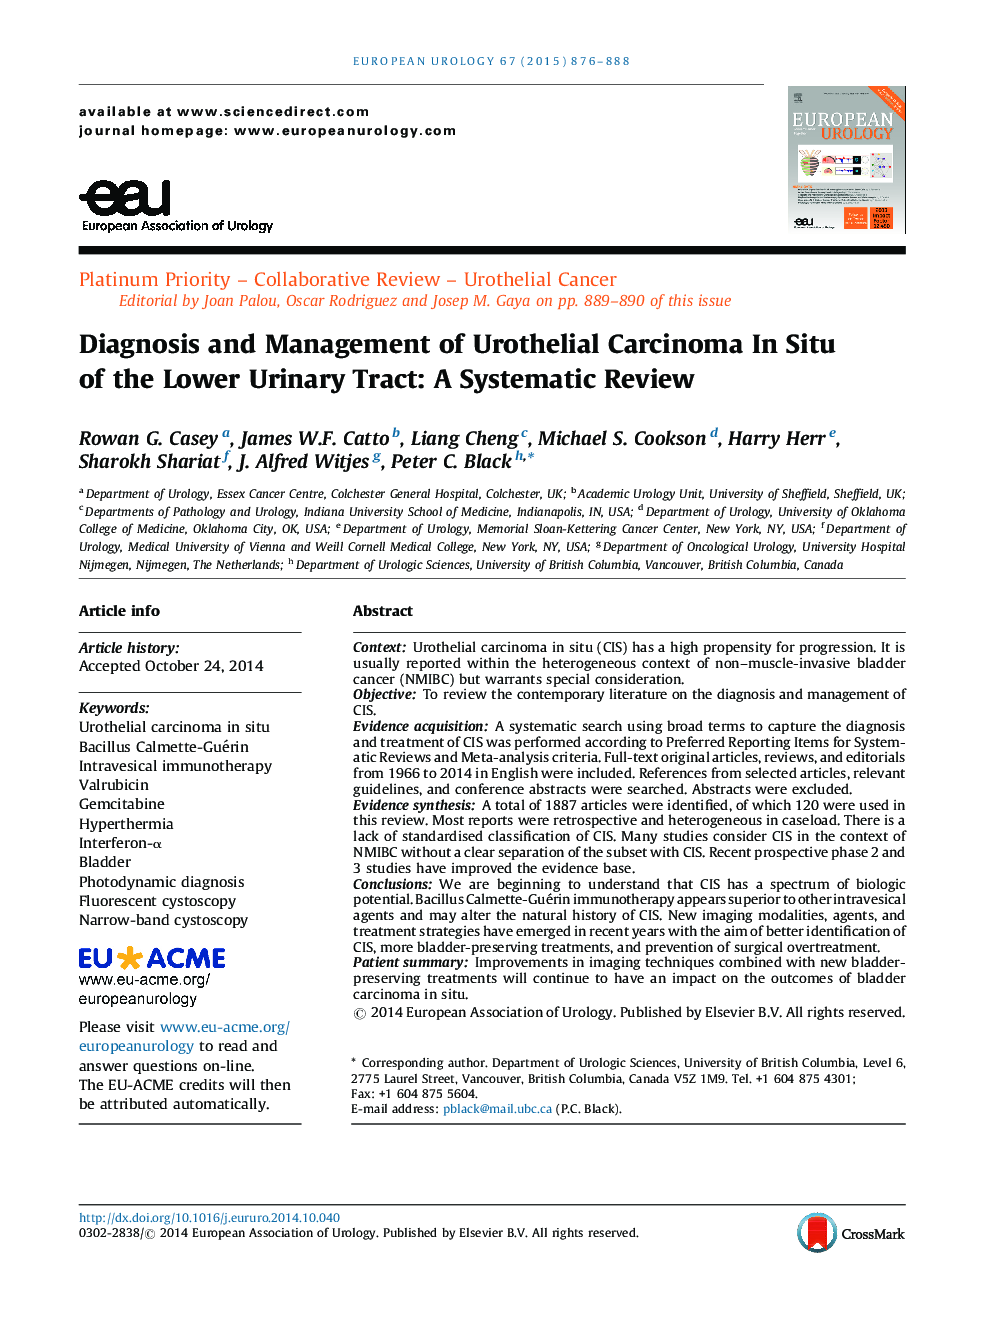 Diagnosis and Management of Urothelial Carcinoma In Situ of the Lower Urinary Tract: A Systematic Review 